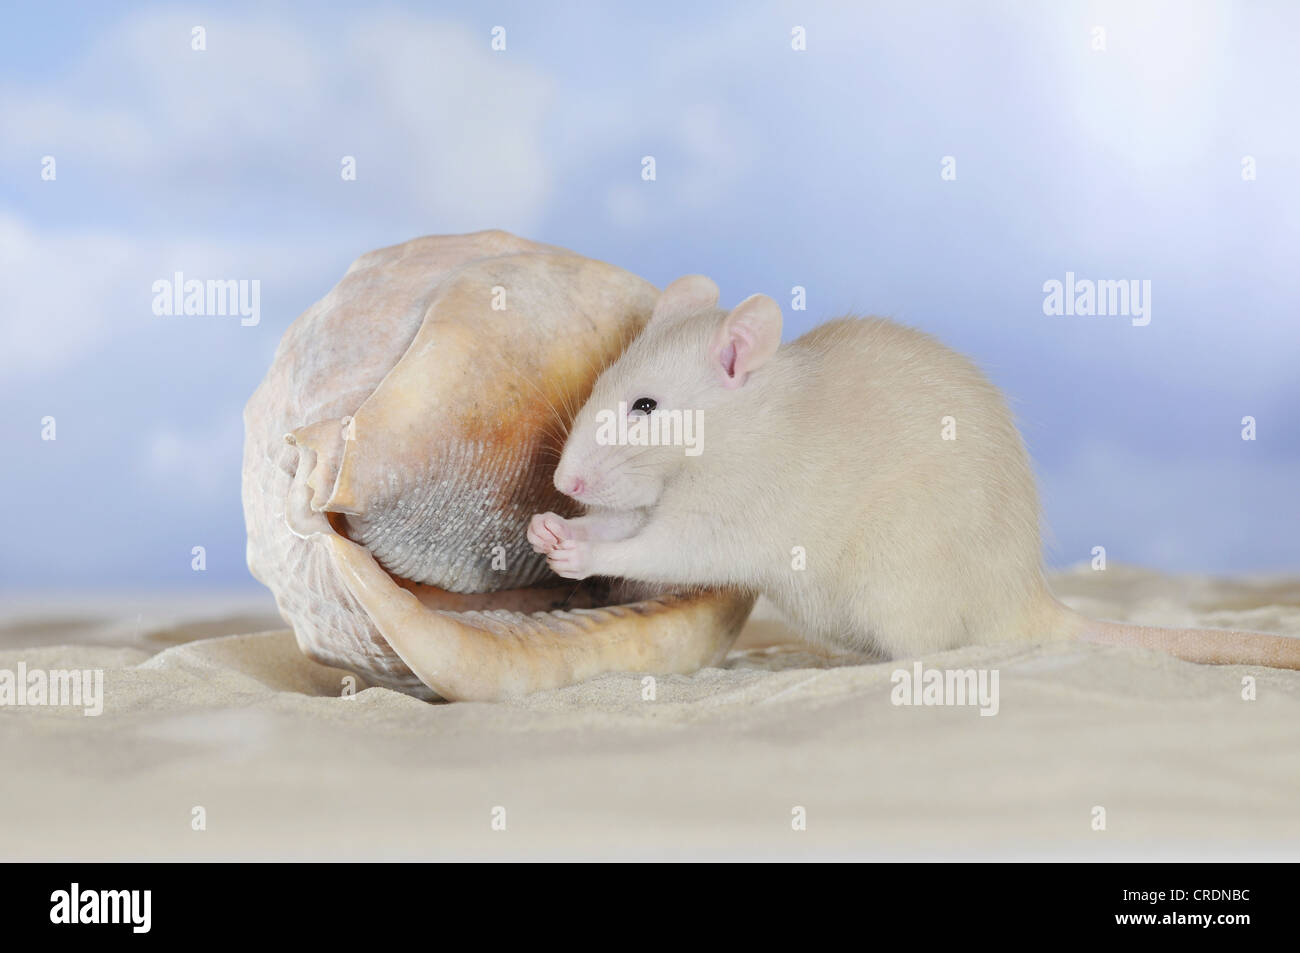 Fancy Rat, cream coloured, sitting on sand beside a seashell, cleaning its paws Stock Photo